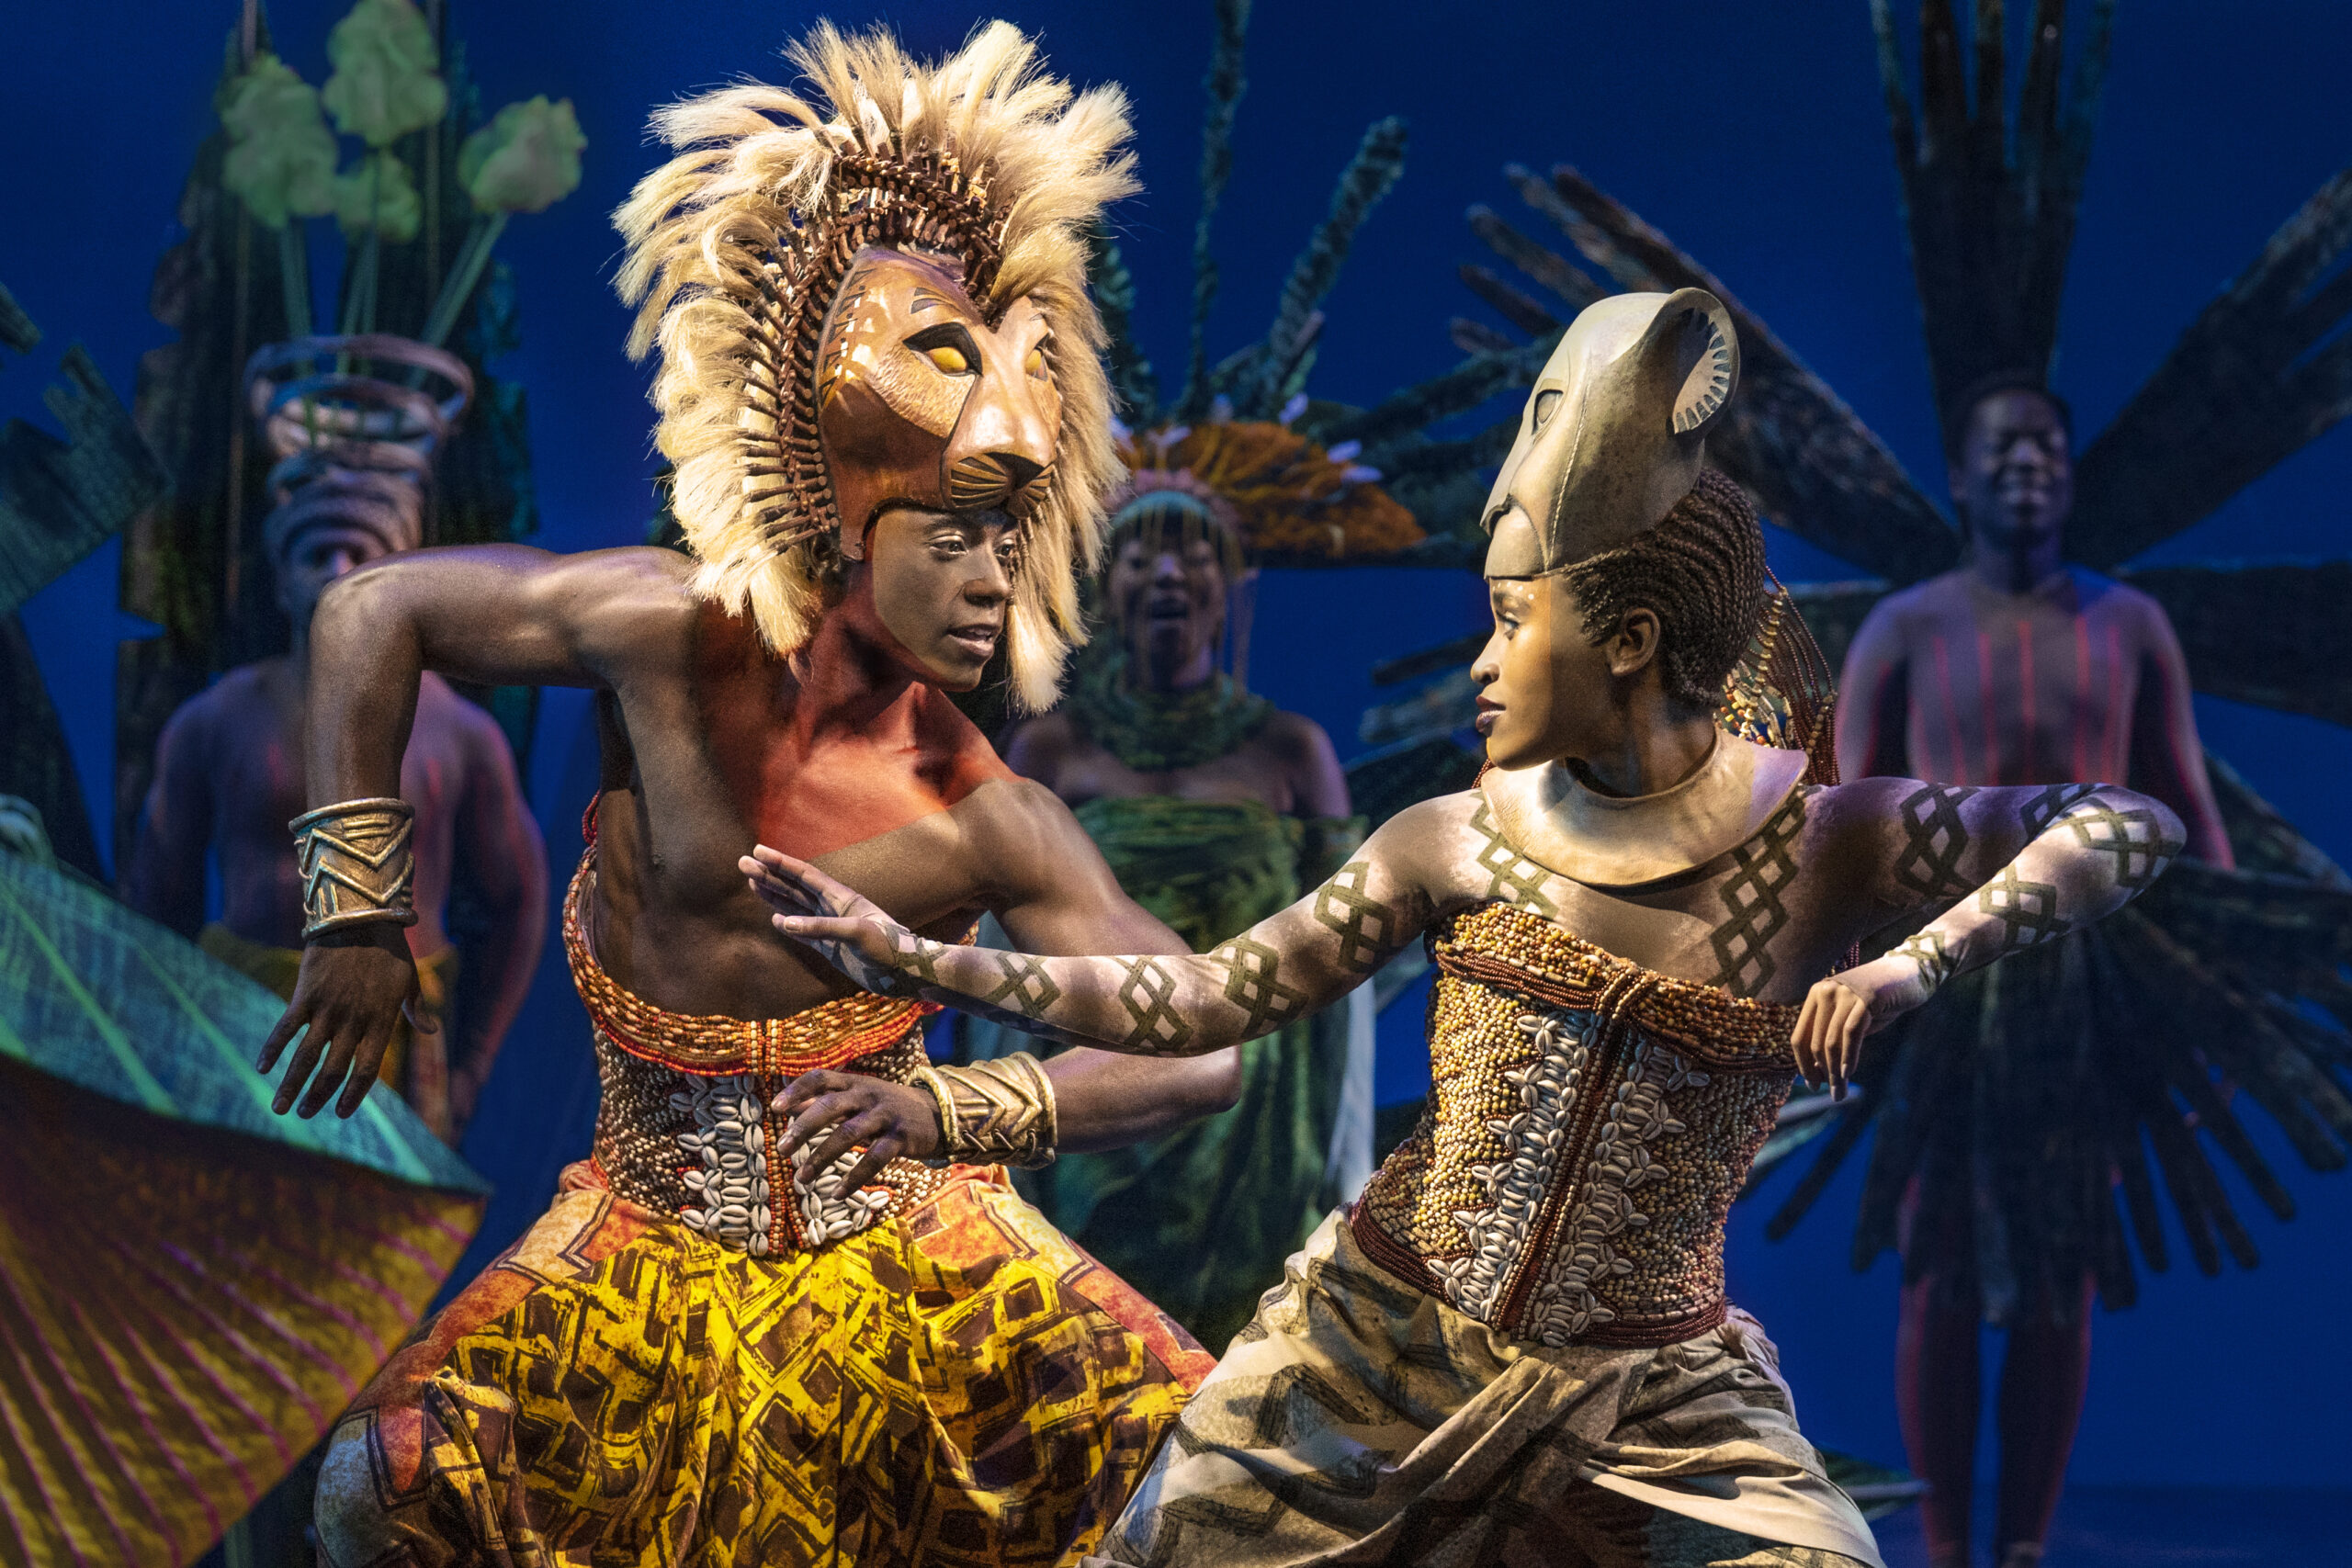 Brandon A. McCall and Pearl Khwezi in The Lion King. Photo by Matthew Murphy.